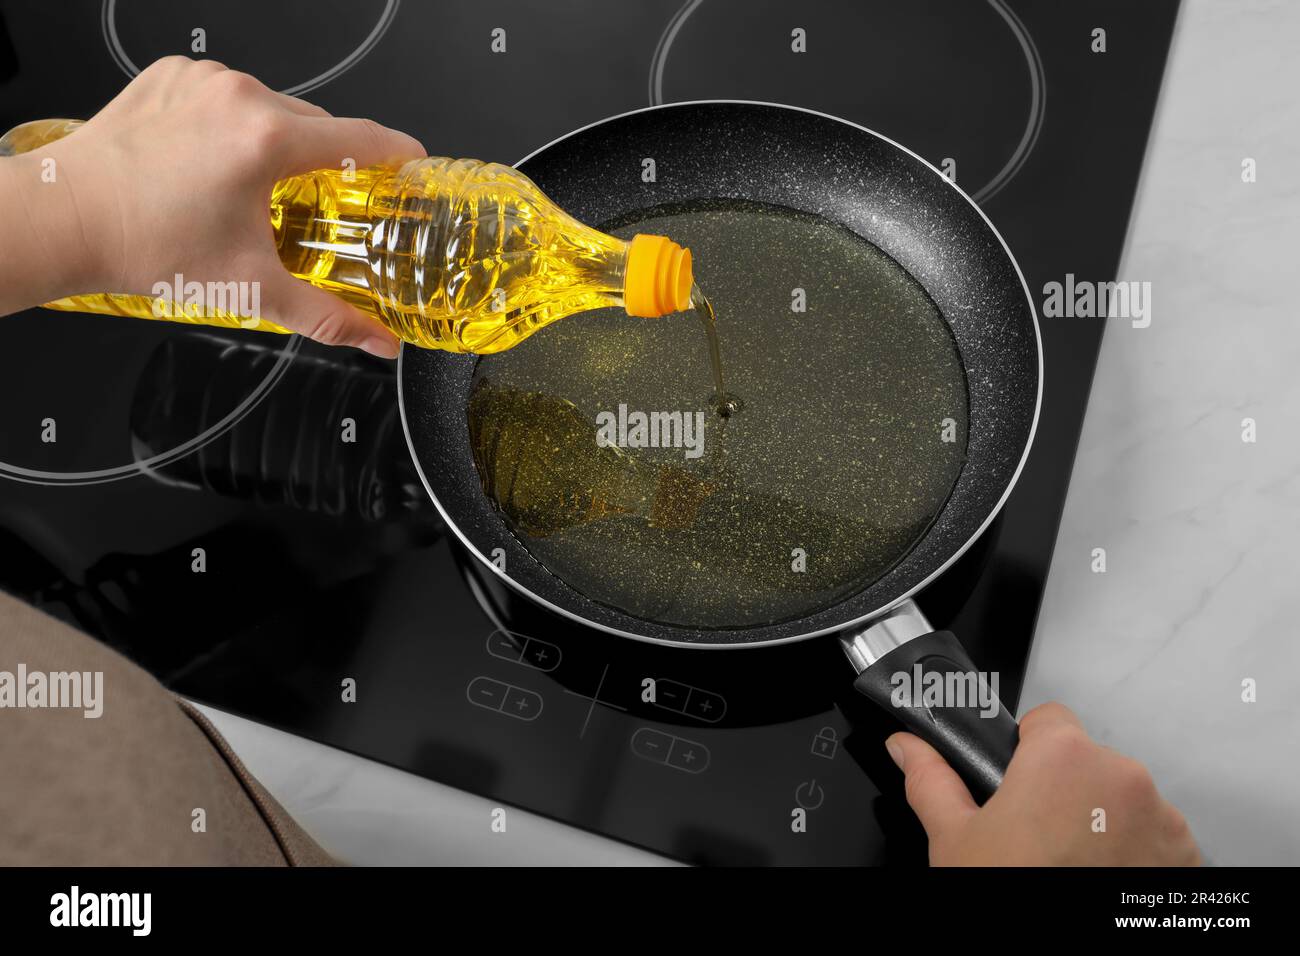 https://c8.alamy.com/comp/2R426KC/woman-pouring-cooking-oil-from-bottle-into-frying-pan-on-stove-above-view-2R426KC.jpg